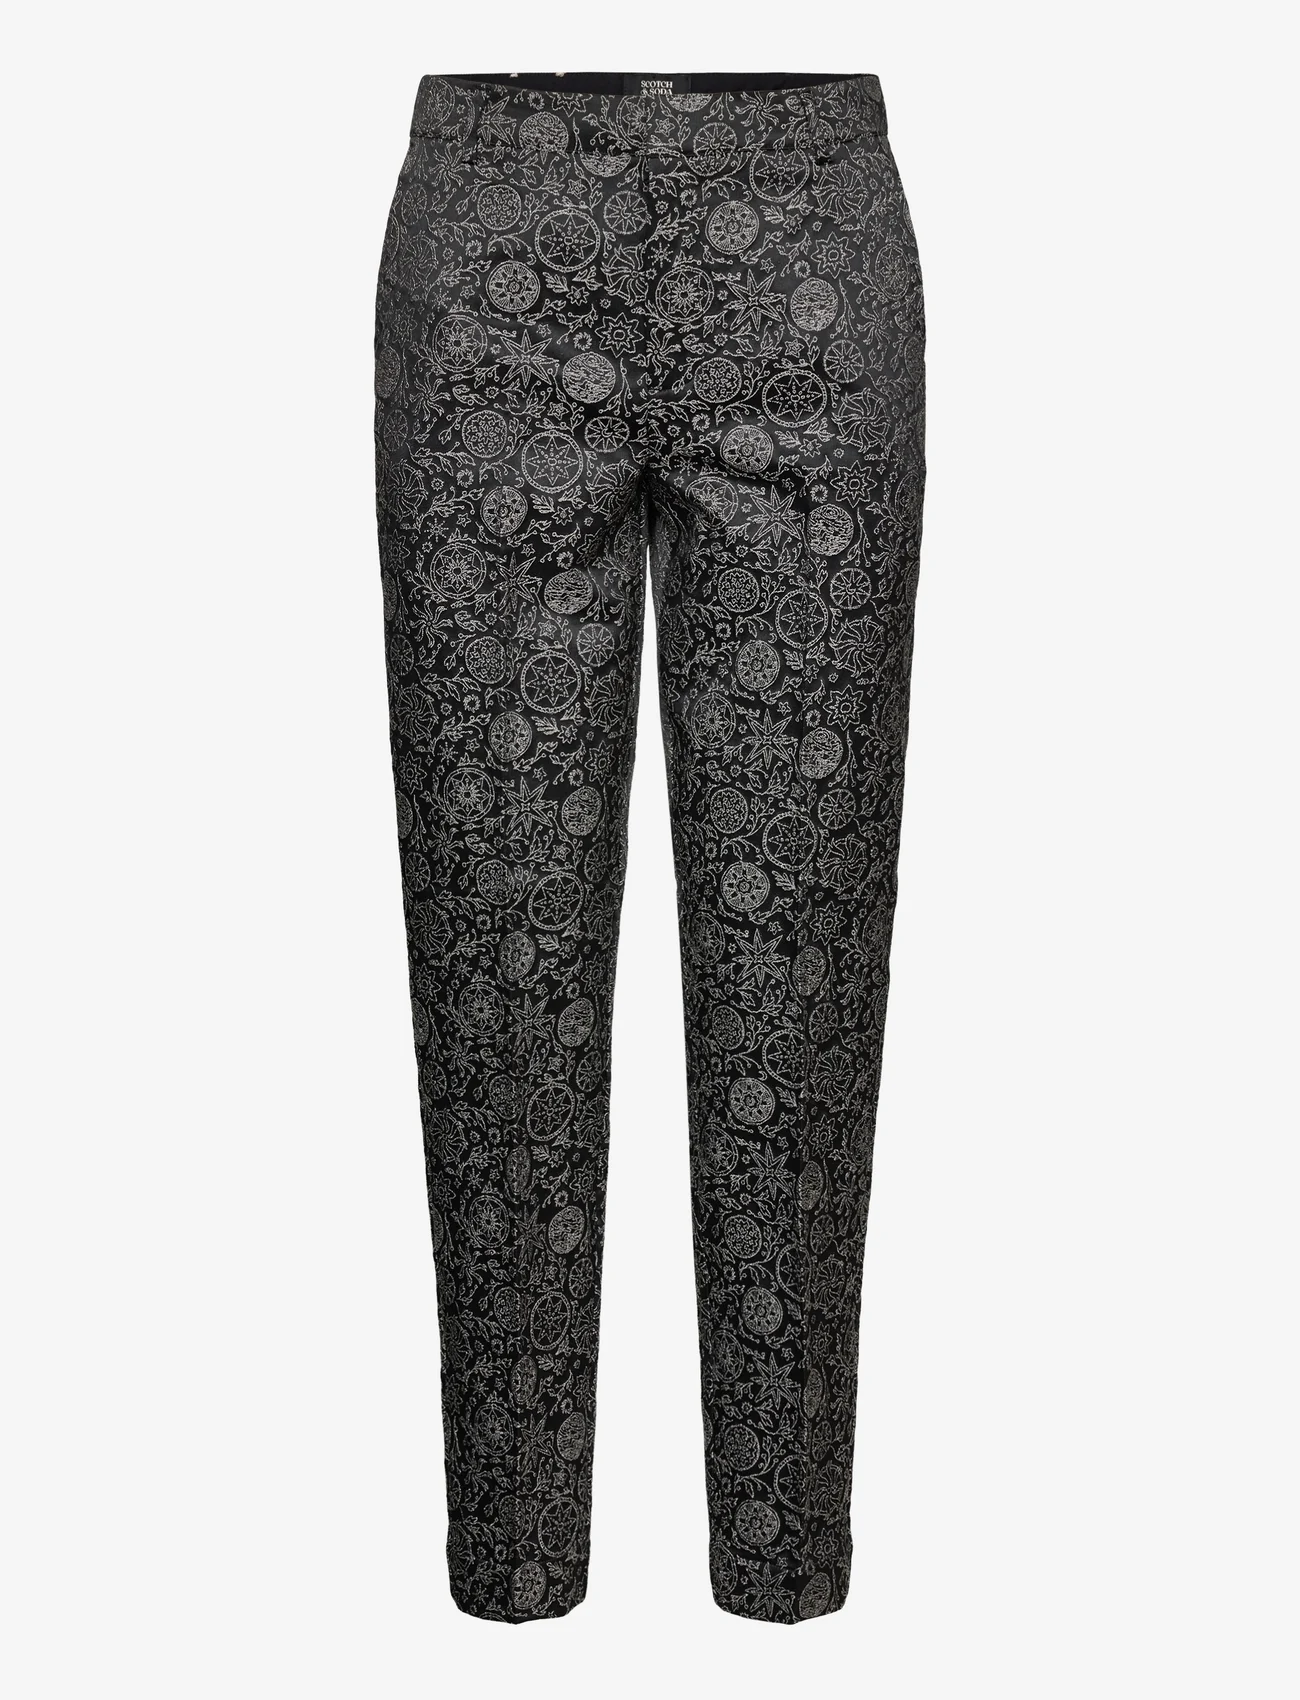 Scotch & Soda - Lowry - Mid rise slim trousers in planetary jacquard pattern - slim fit -housut - planetary icons - 0